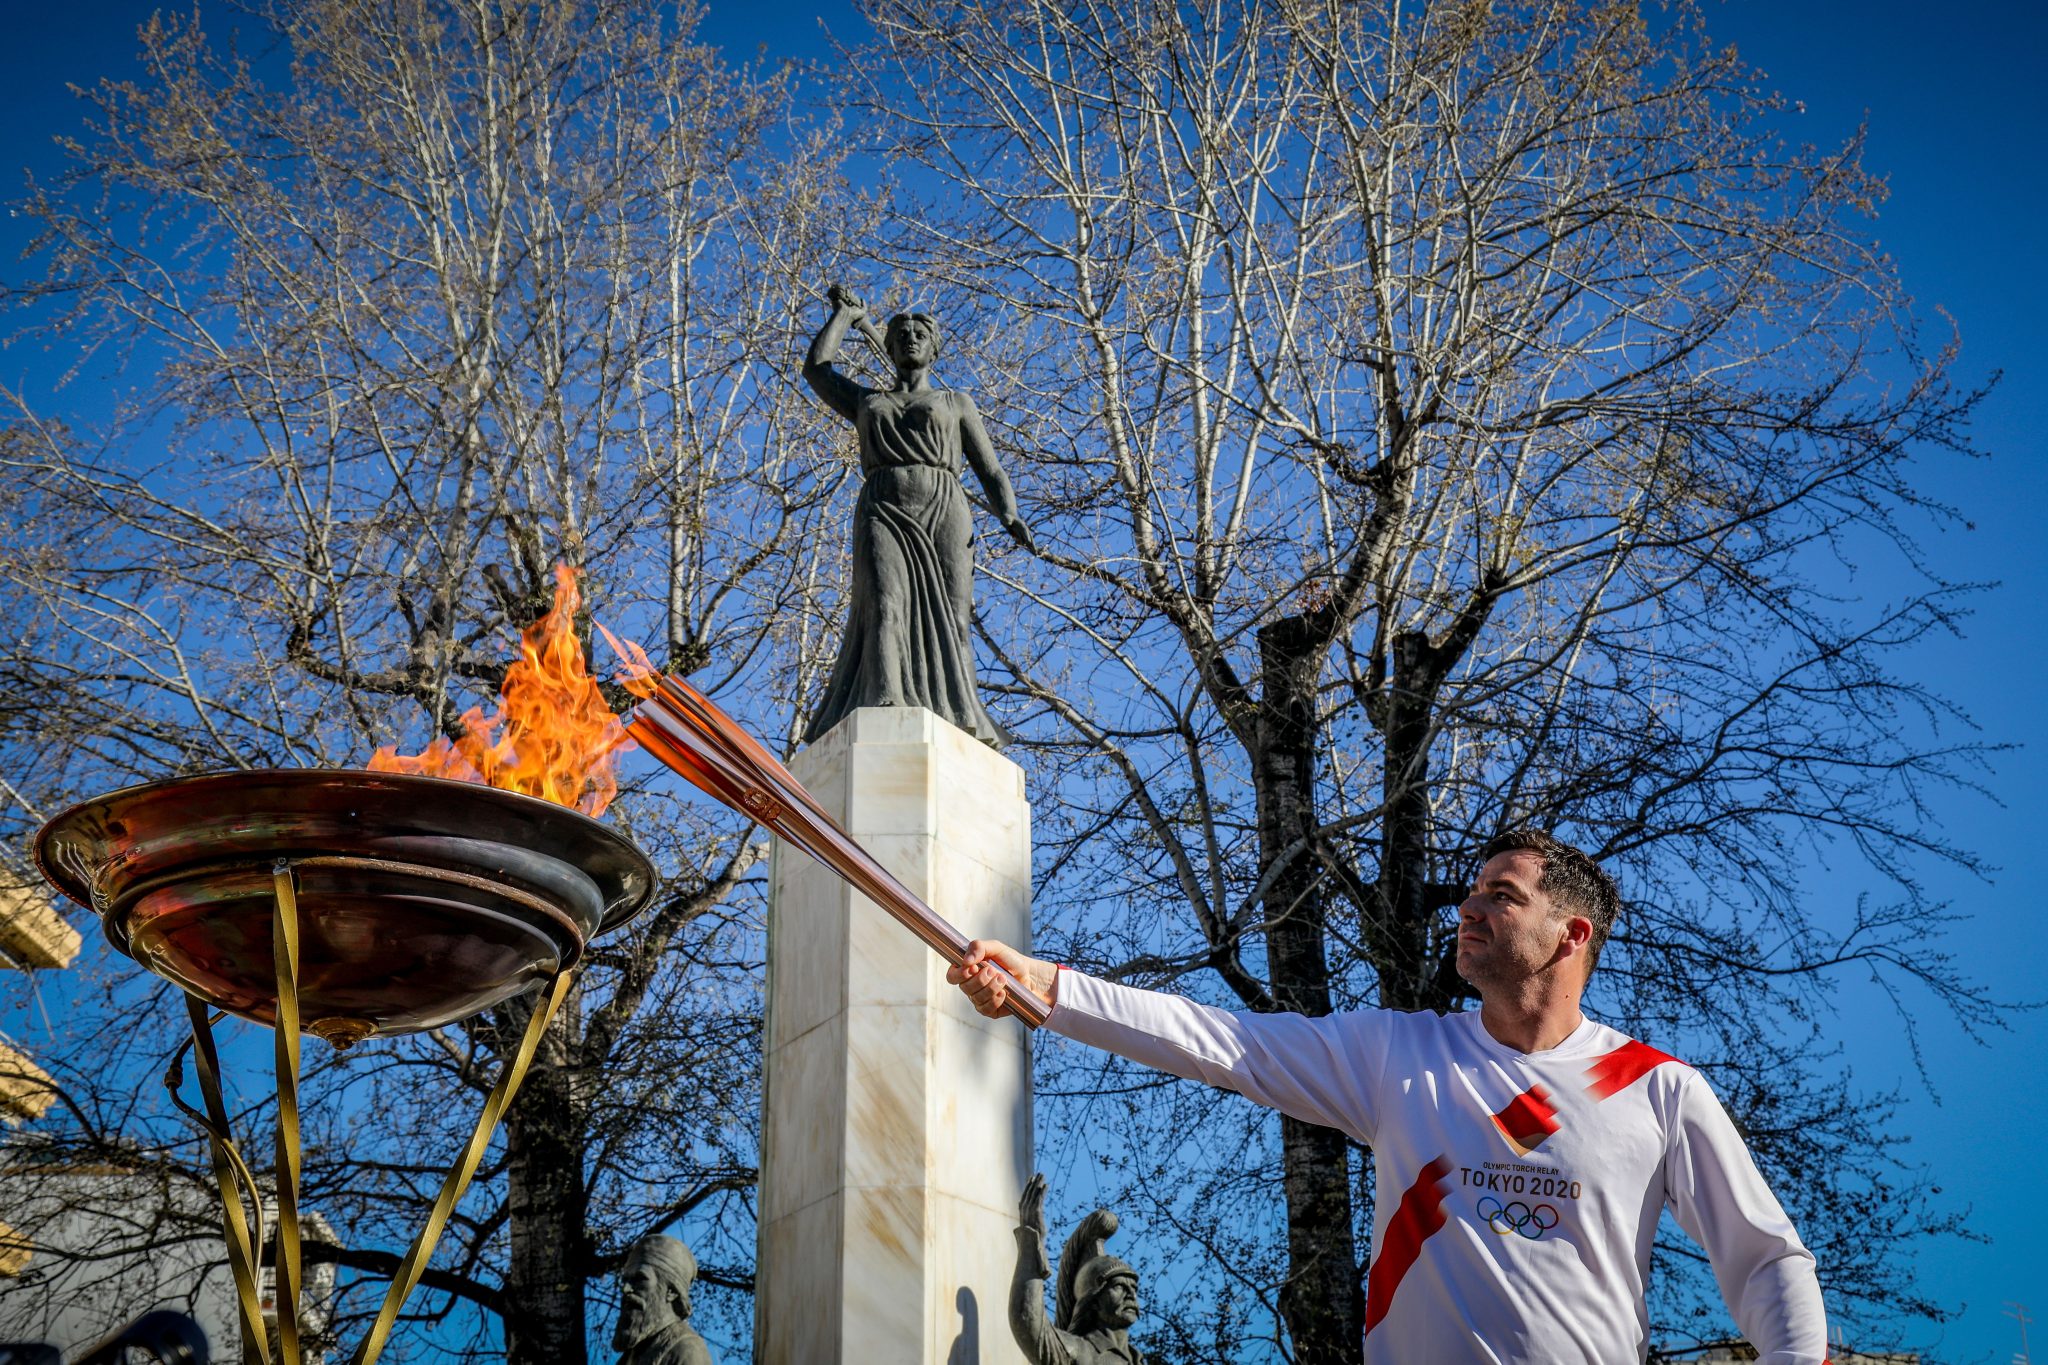 Olympic Flame-Lighting and Torch Relay in Greece: Full Program